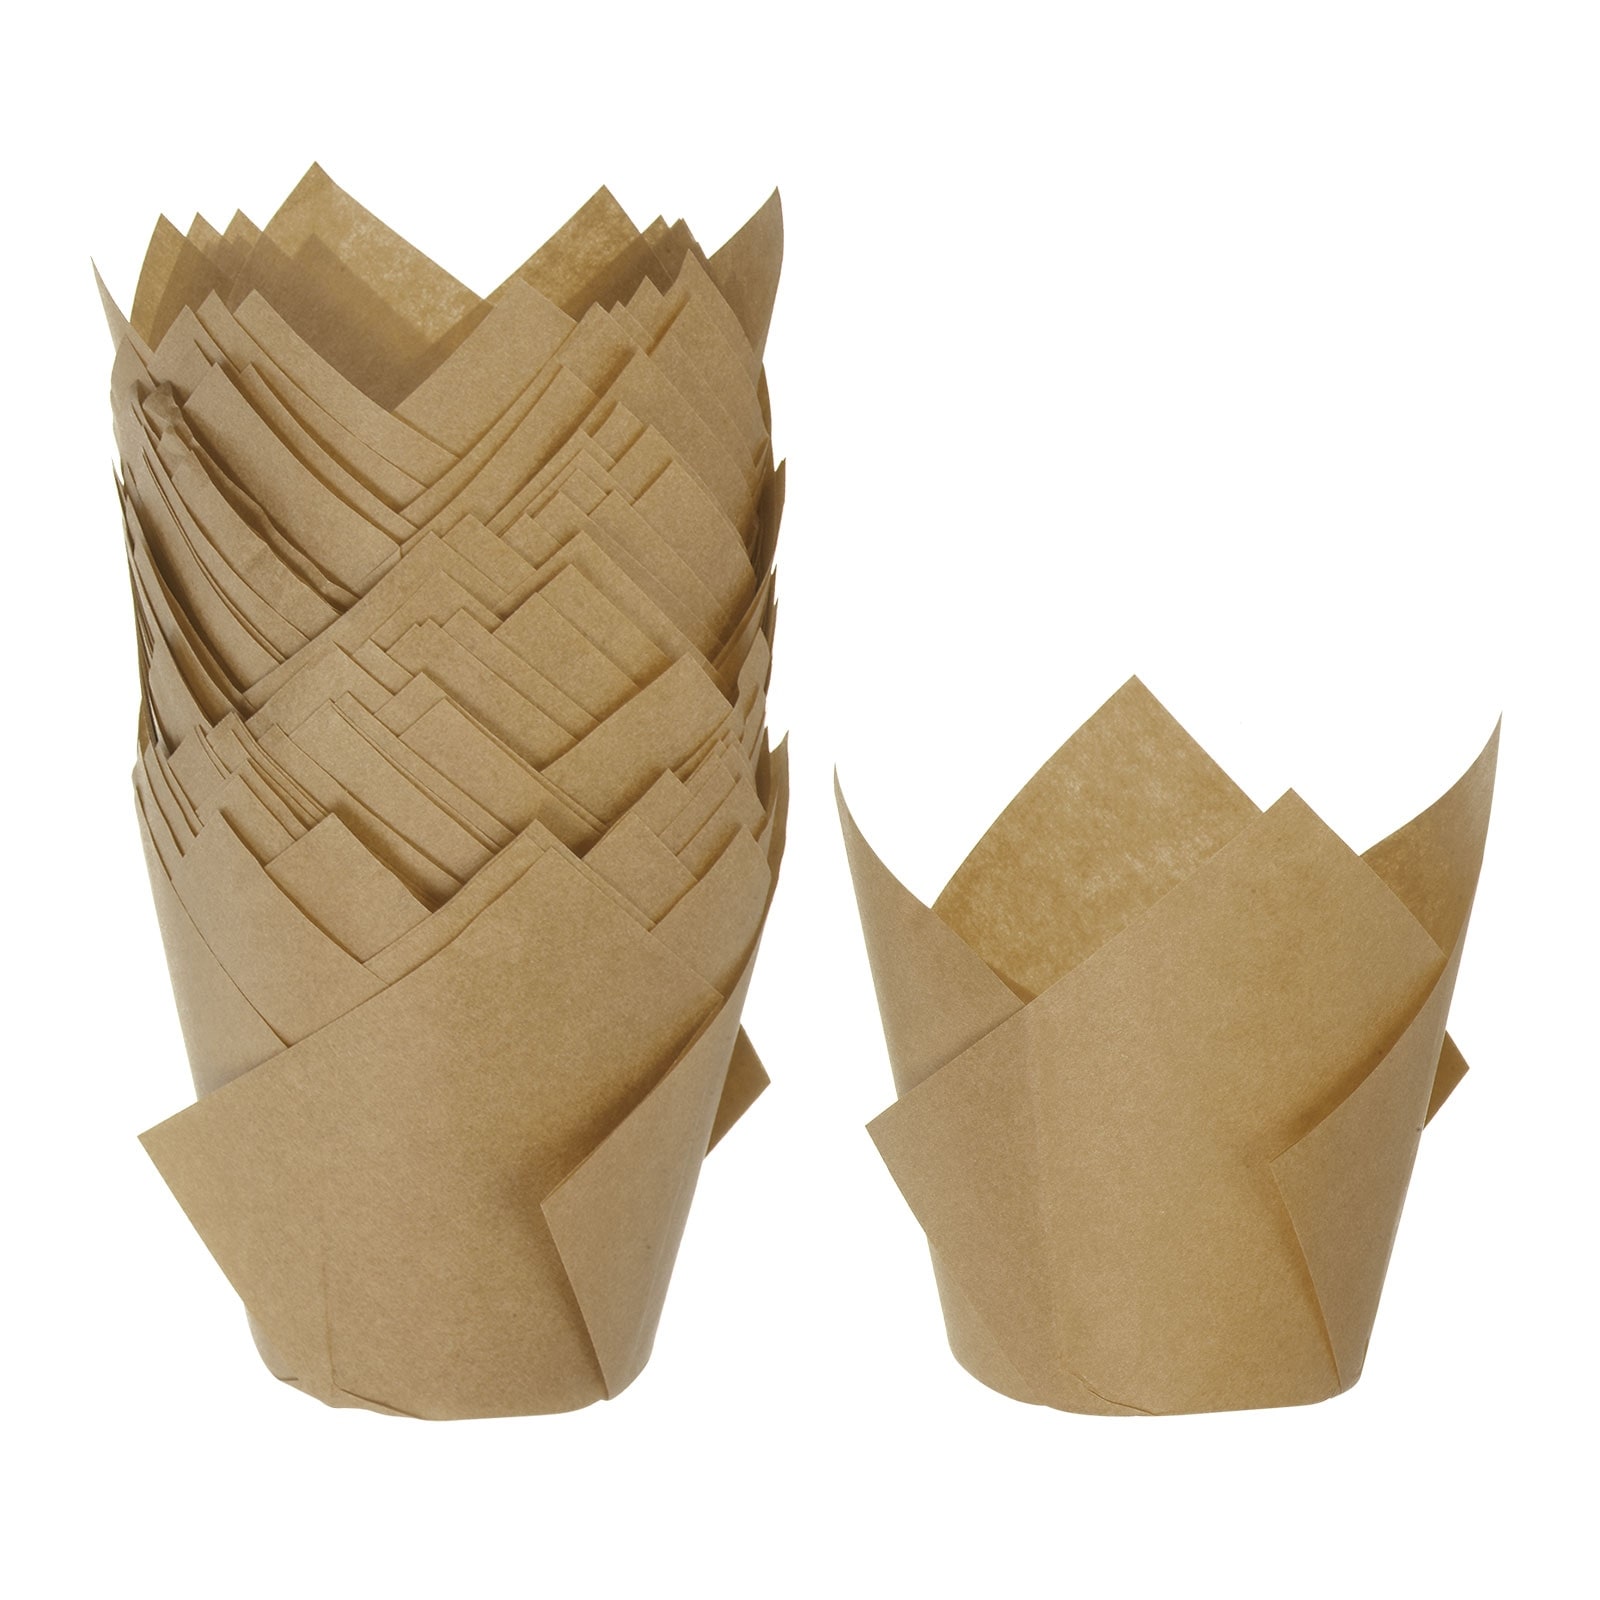 https://ak1.ostkcdn.com/images/products/is/images/direct/c7b55775bb5bf1f5be34ee5925d997af5b190edf/50Pcs-Tulip-Cupcake-Liners-Paper-Baking-Cups-Natural.jpg